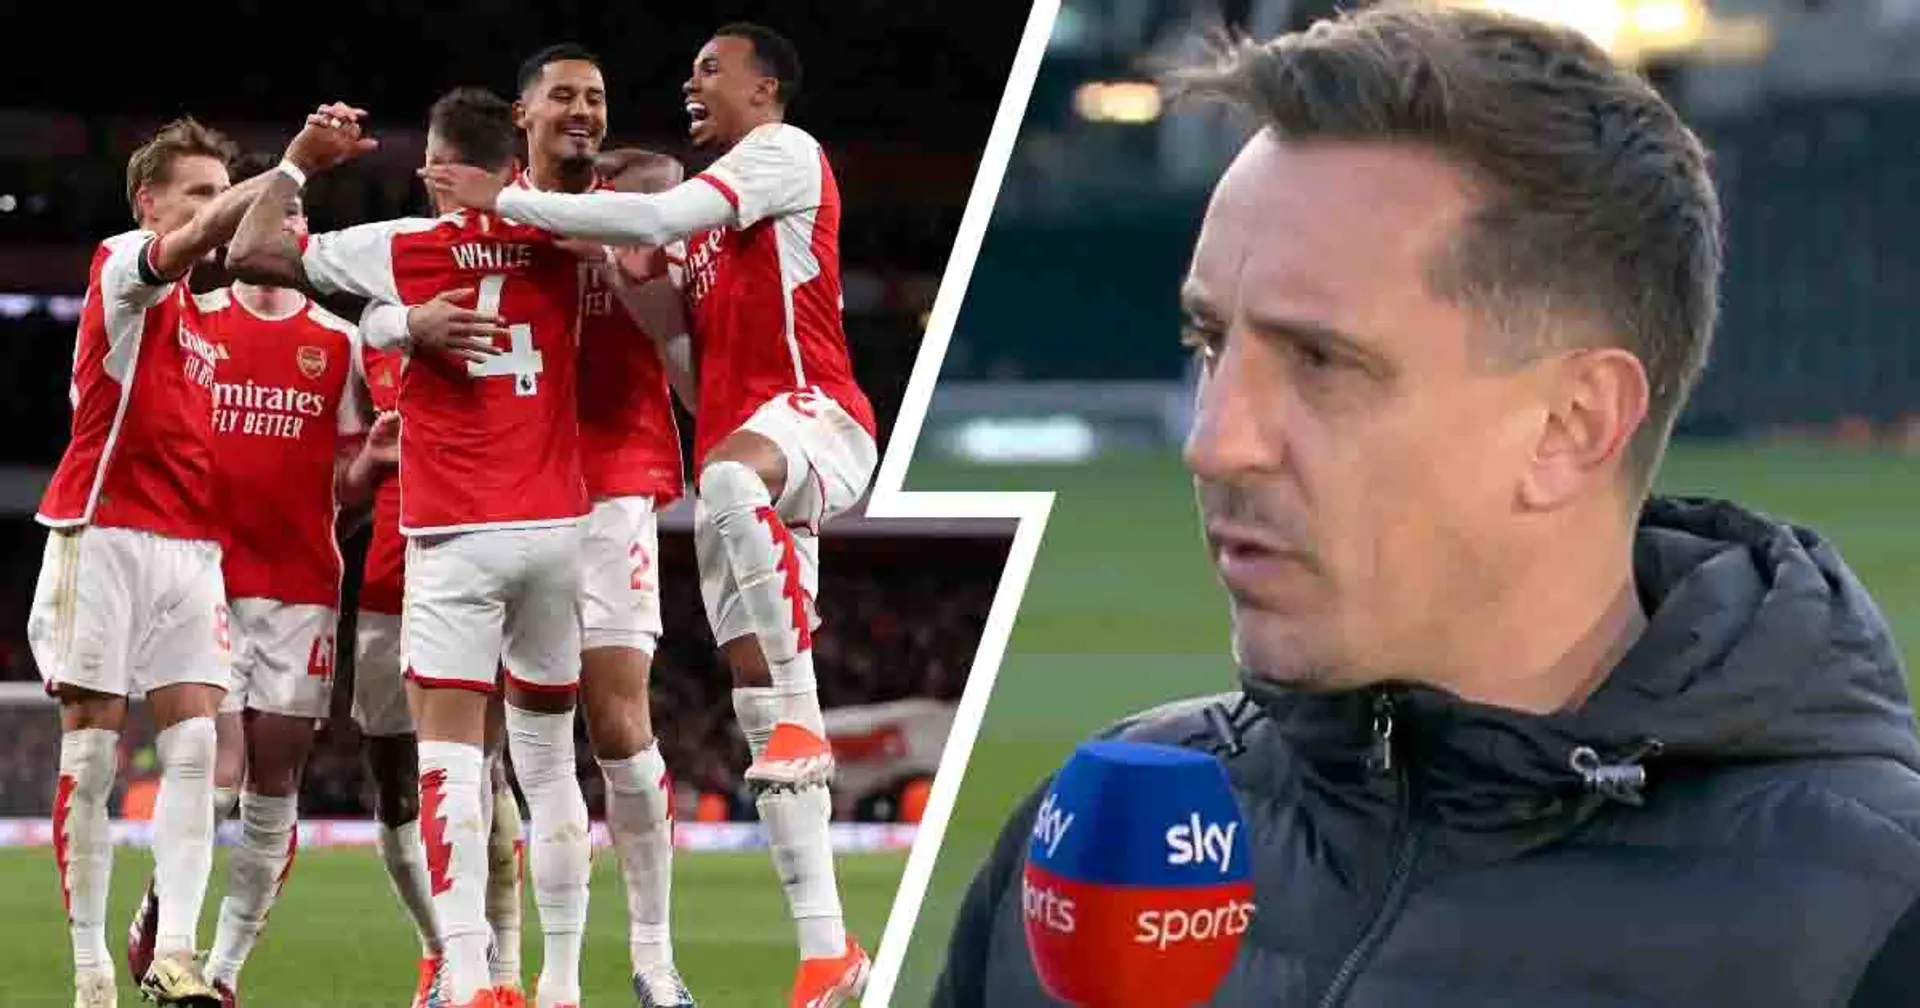 Gary Neville warns Arsenal about four dangerous elements to look out for against Tottenham